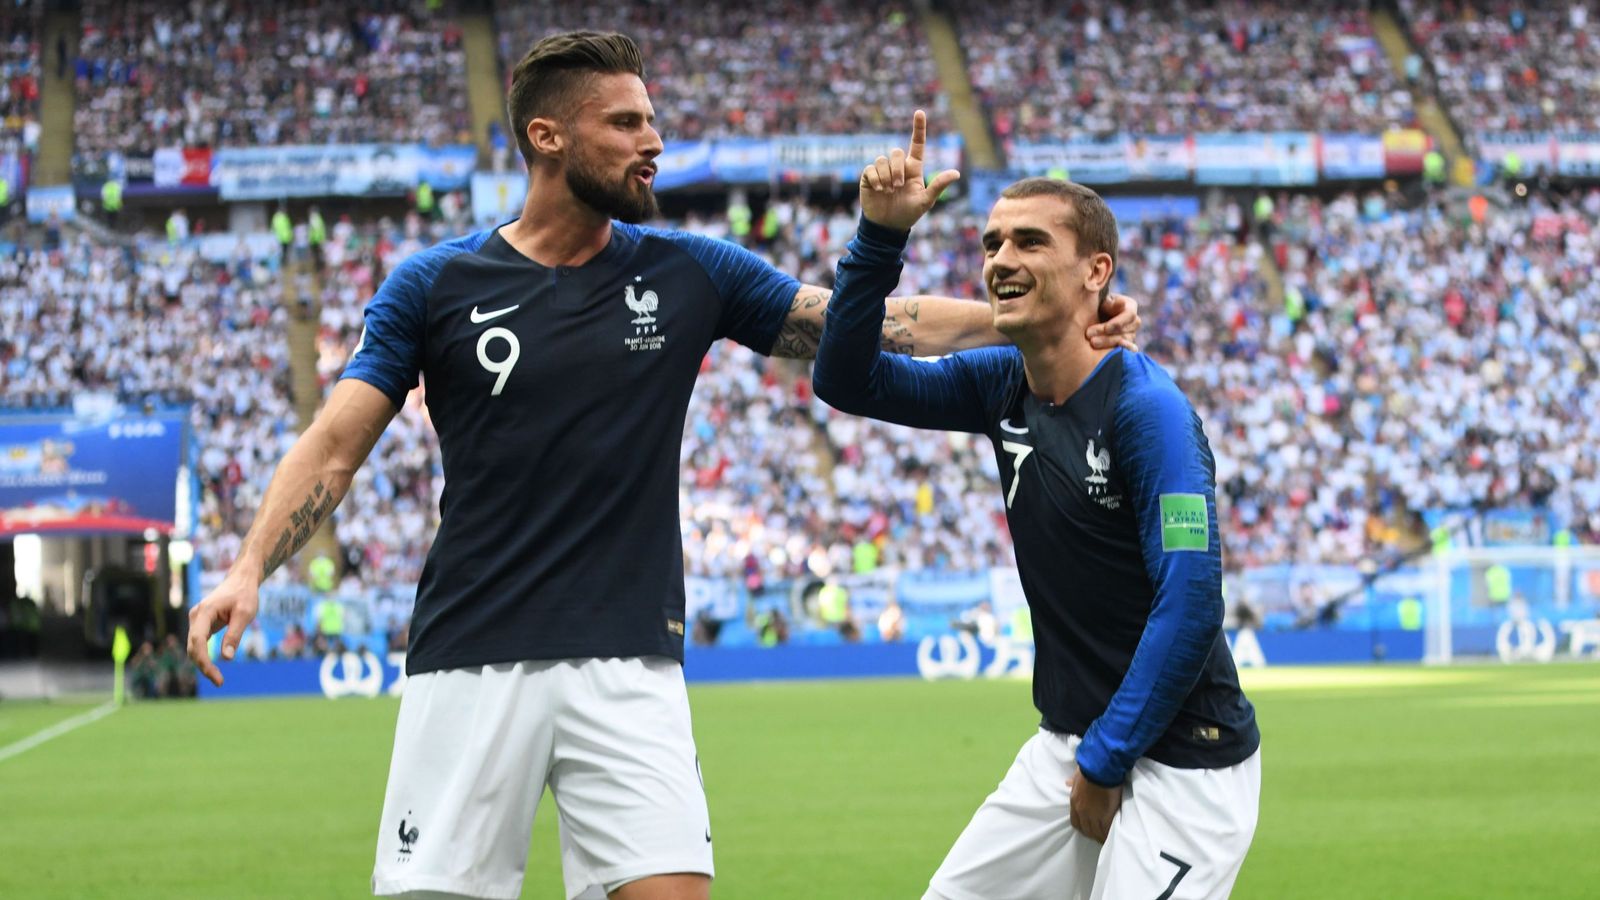 2018 World Cup Team of the Tournament: World Champion Griezmann completes XI